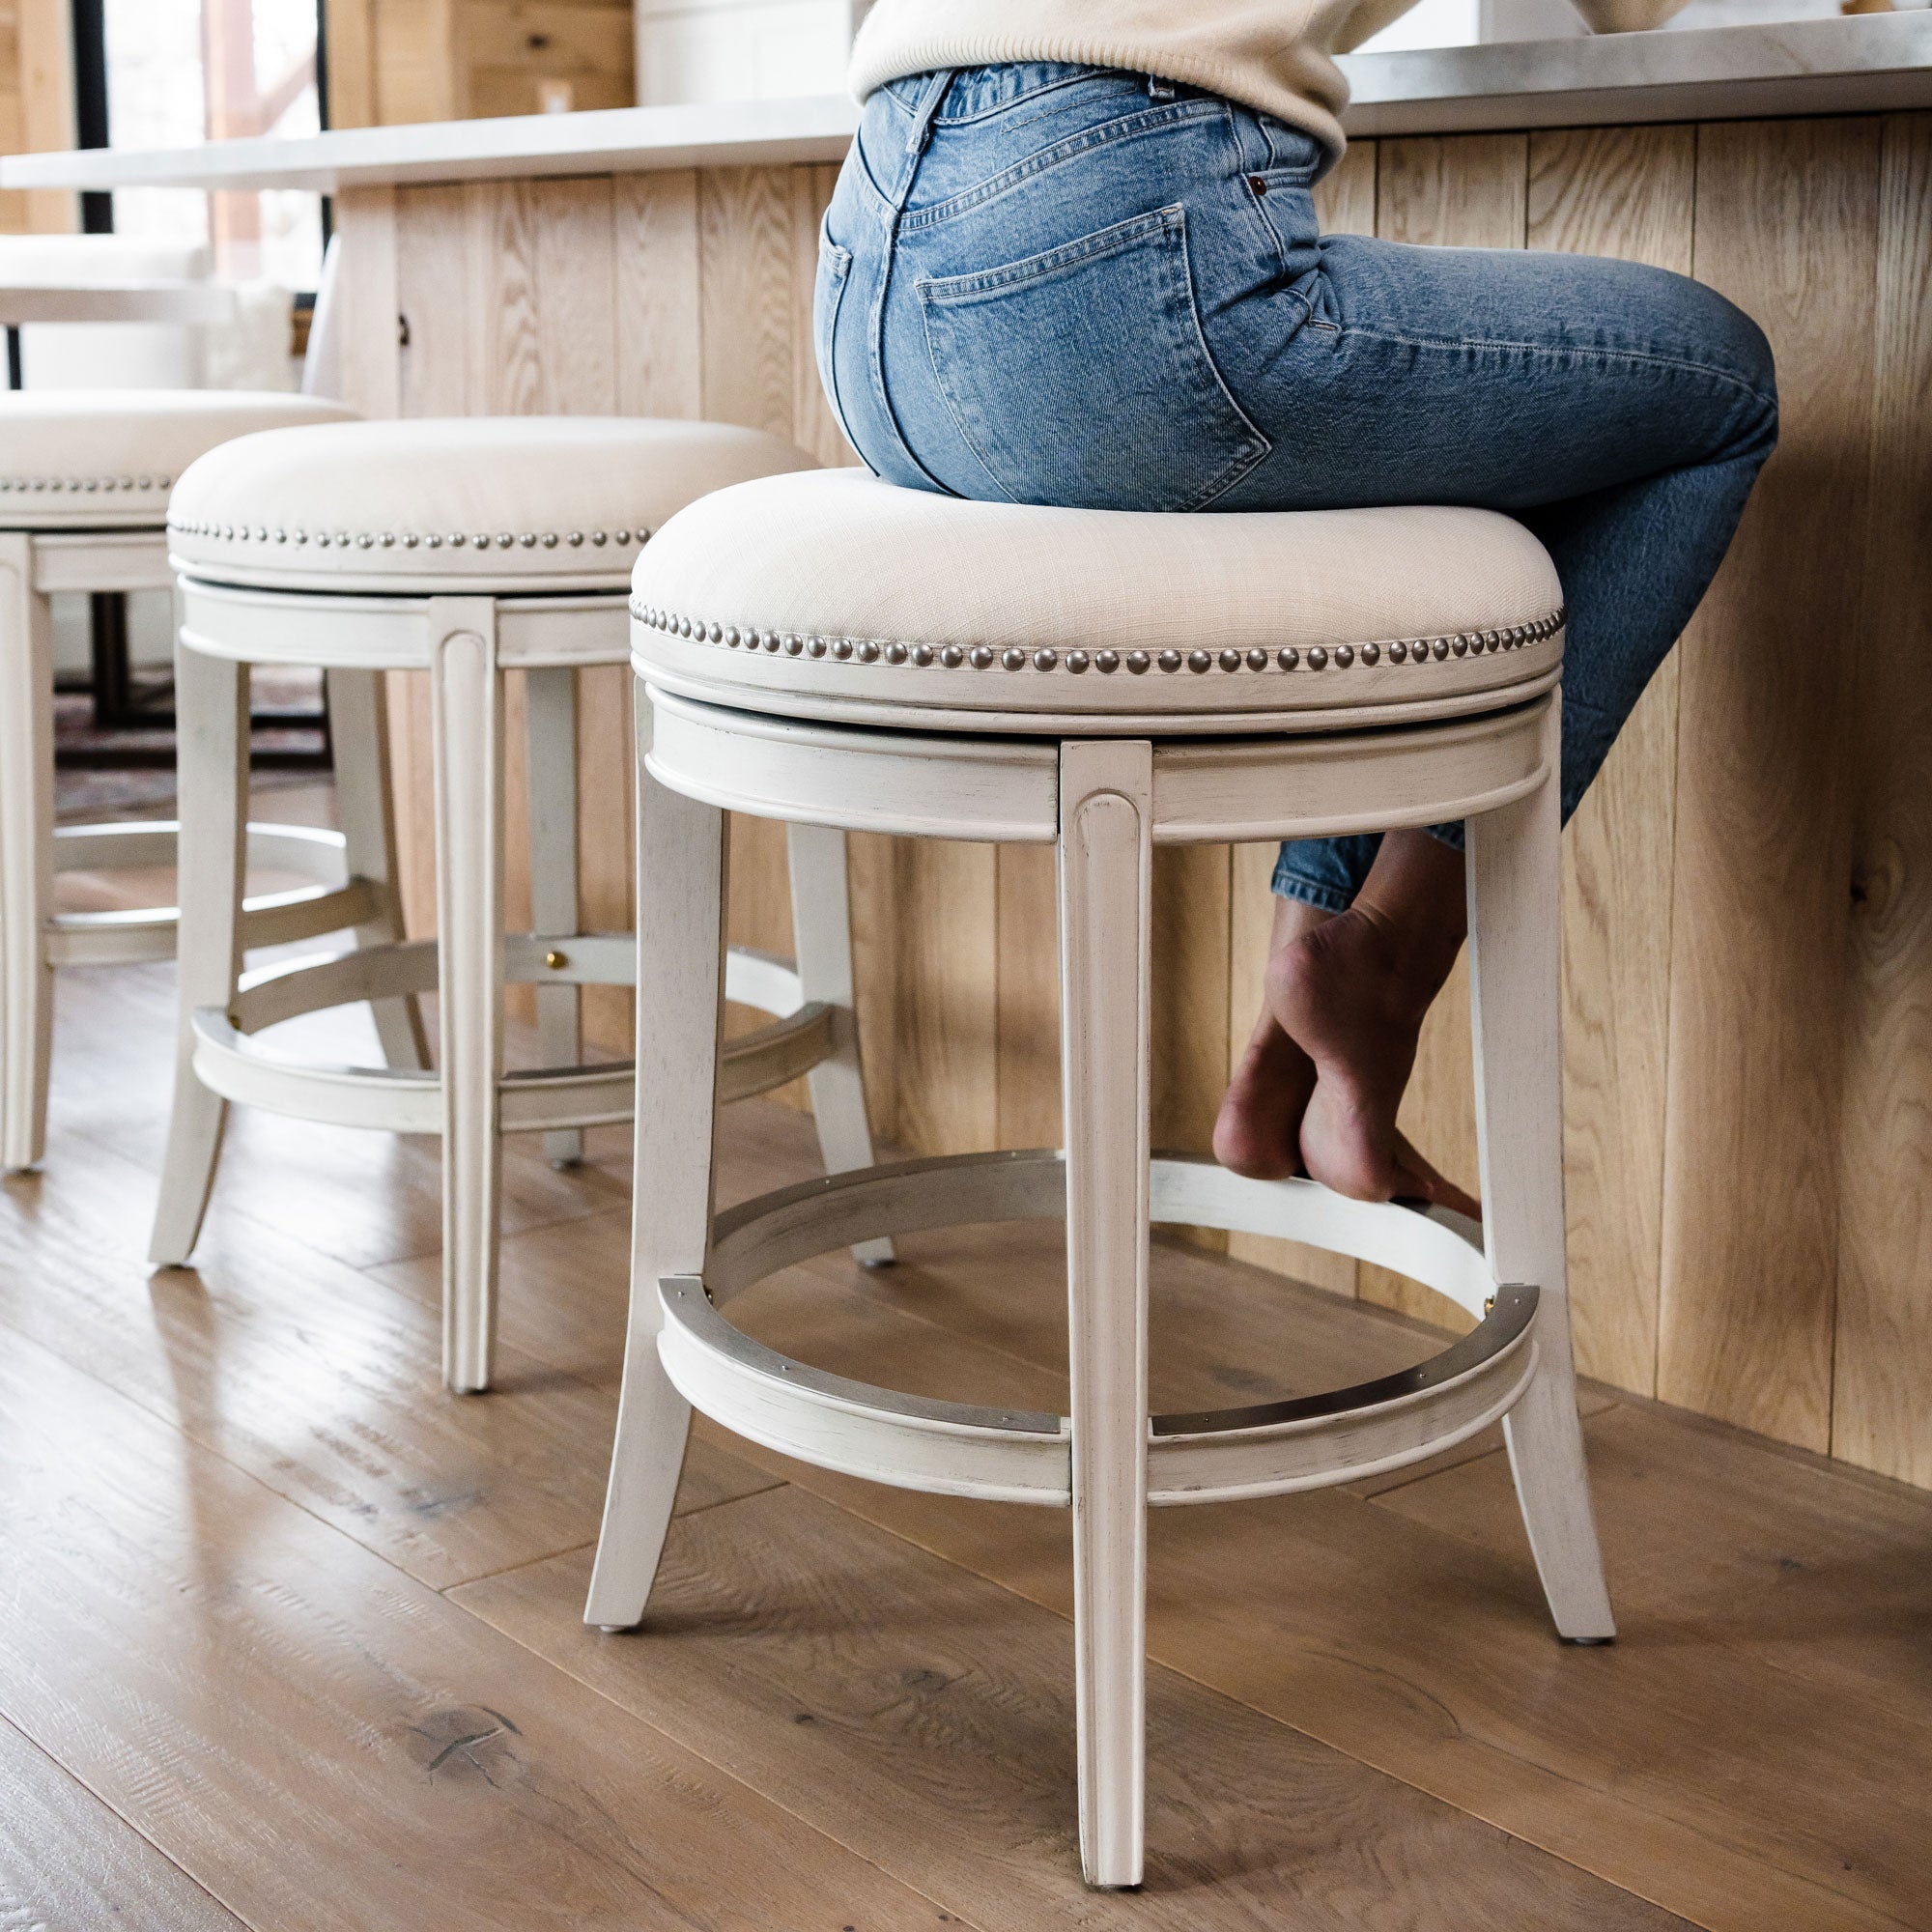 Alexander Backless Counter Stool in White Oak Finish with Natural Color Fabric Upholstery in Stools by Maven Lane